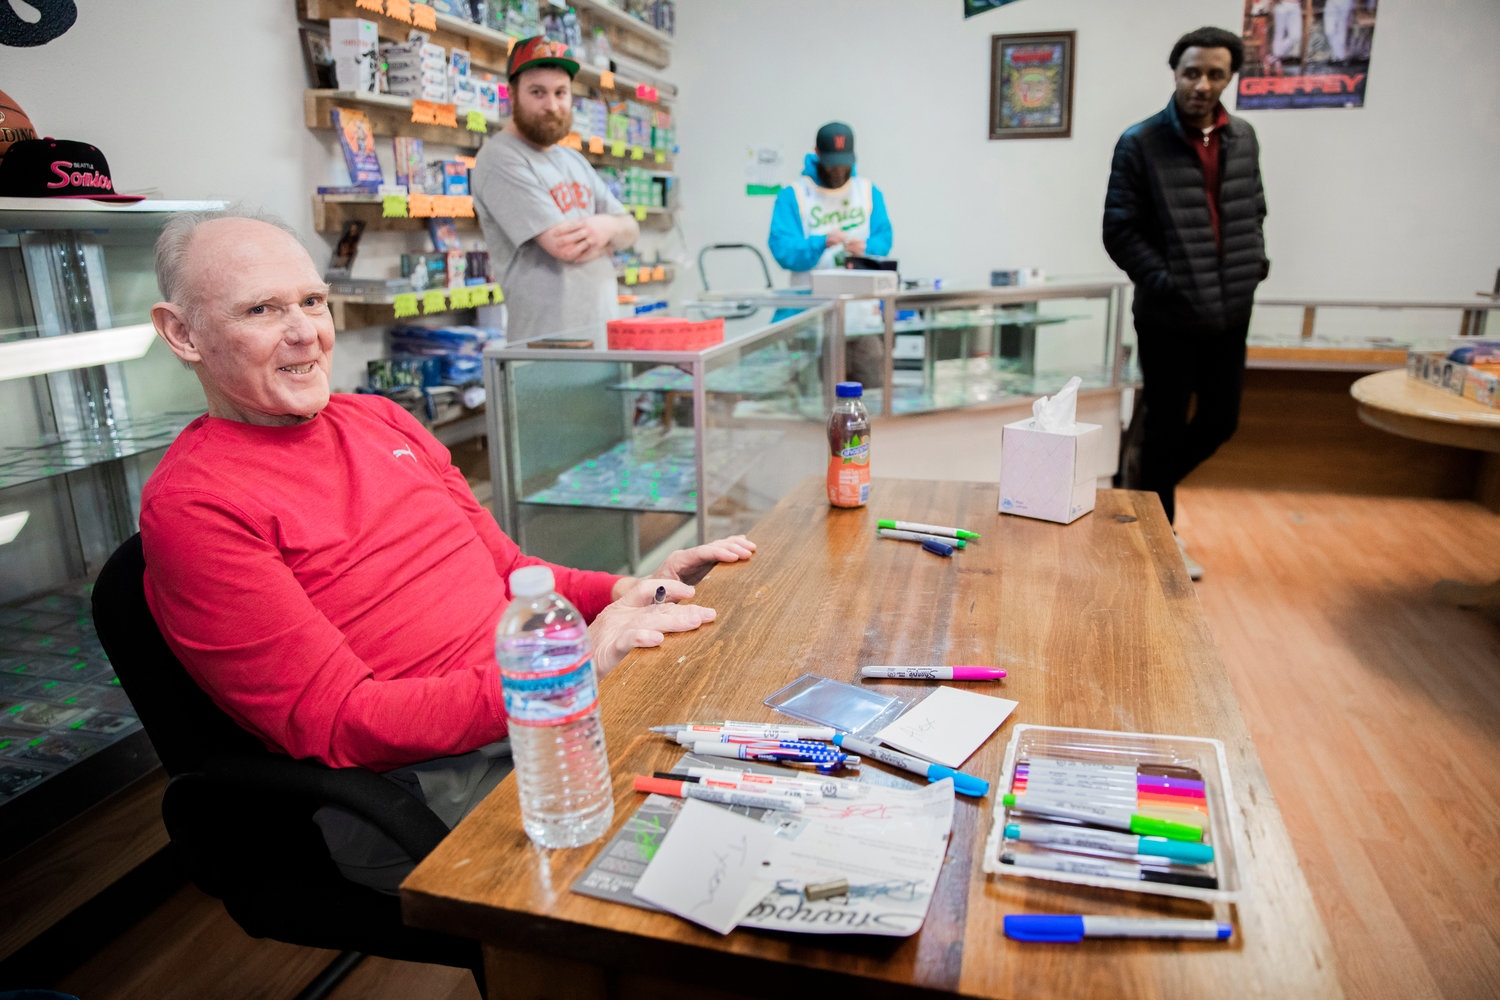 George Karl, who was inducted the Naismith Memorial Basketball Hall of Fame in 2022, smiles while answering questions about his career and signing autographs on Friday at Keiper’s Cards in Centralia.